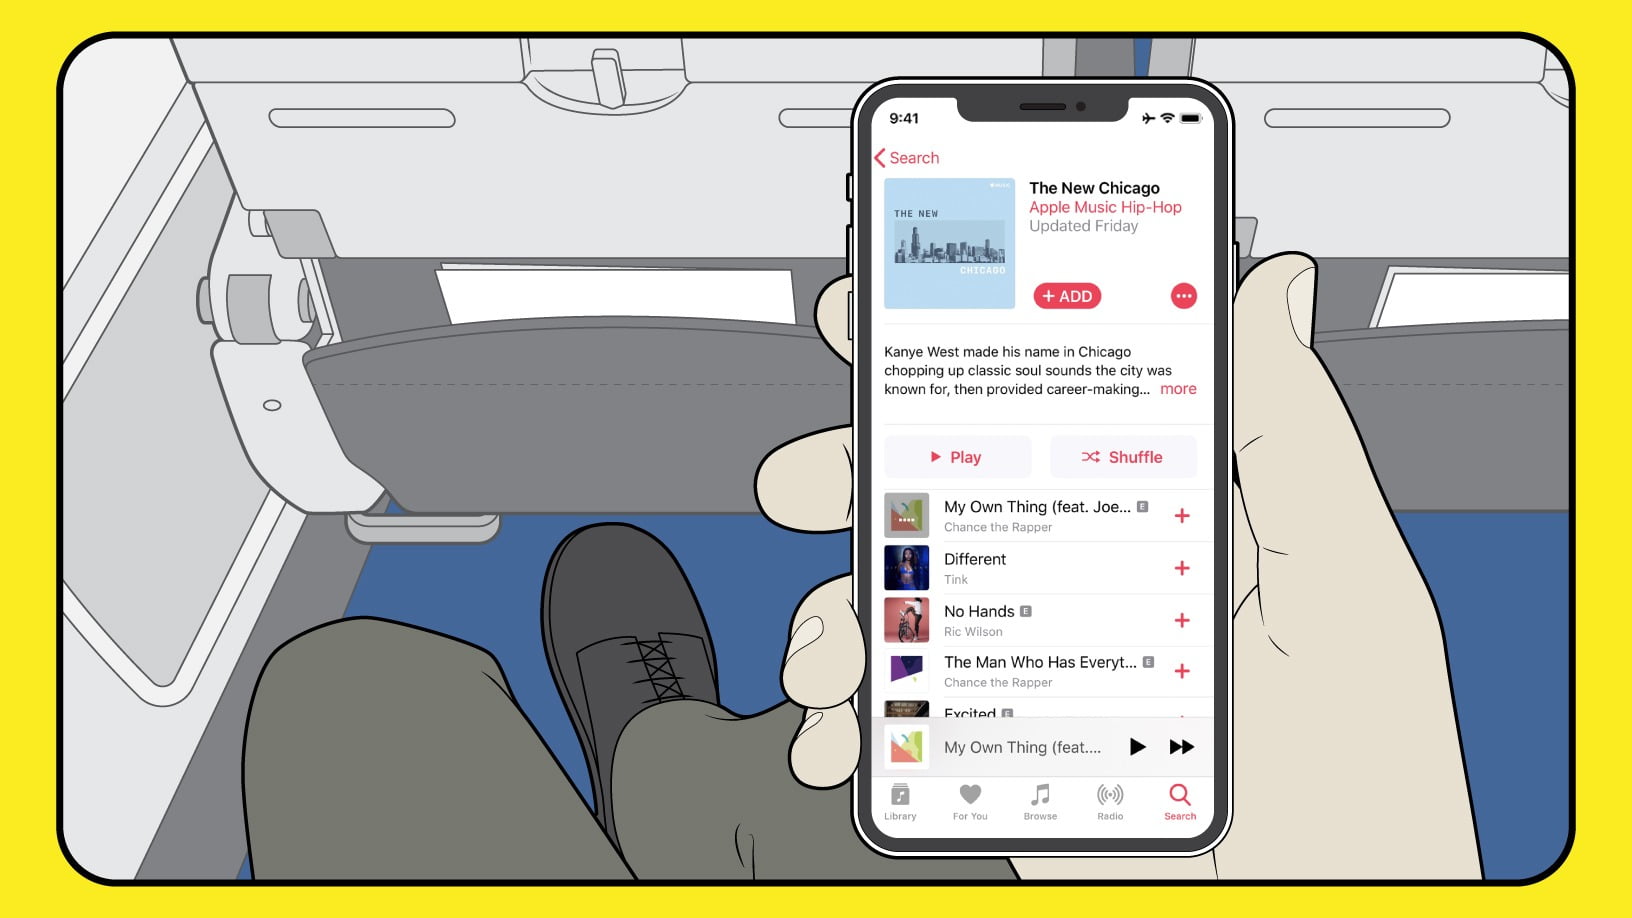 Apple Music takes flight on American Airlines Playlist animation 1 01302019